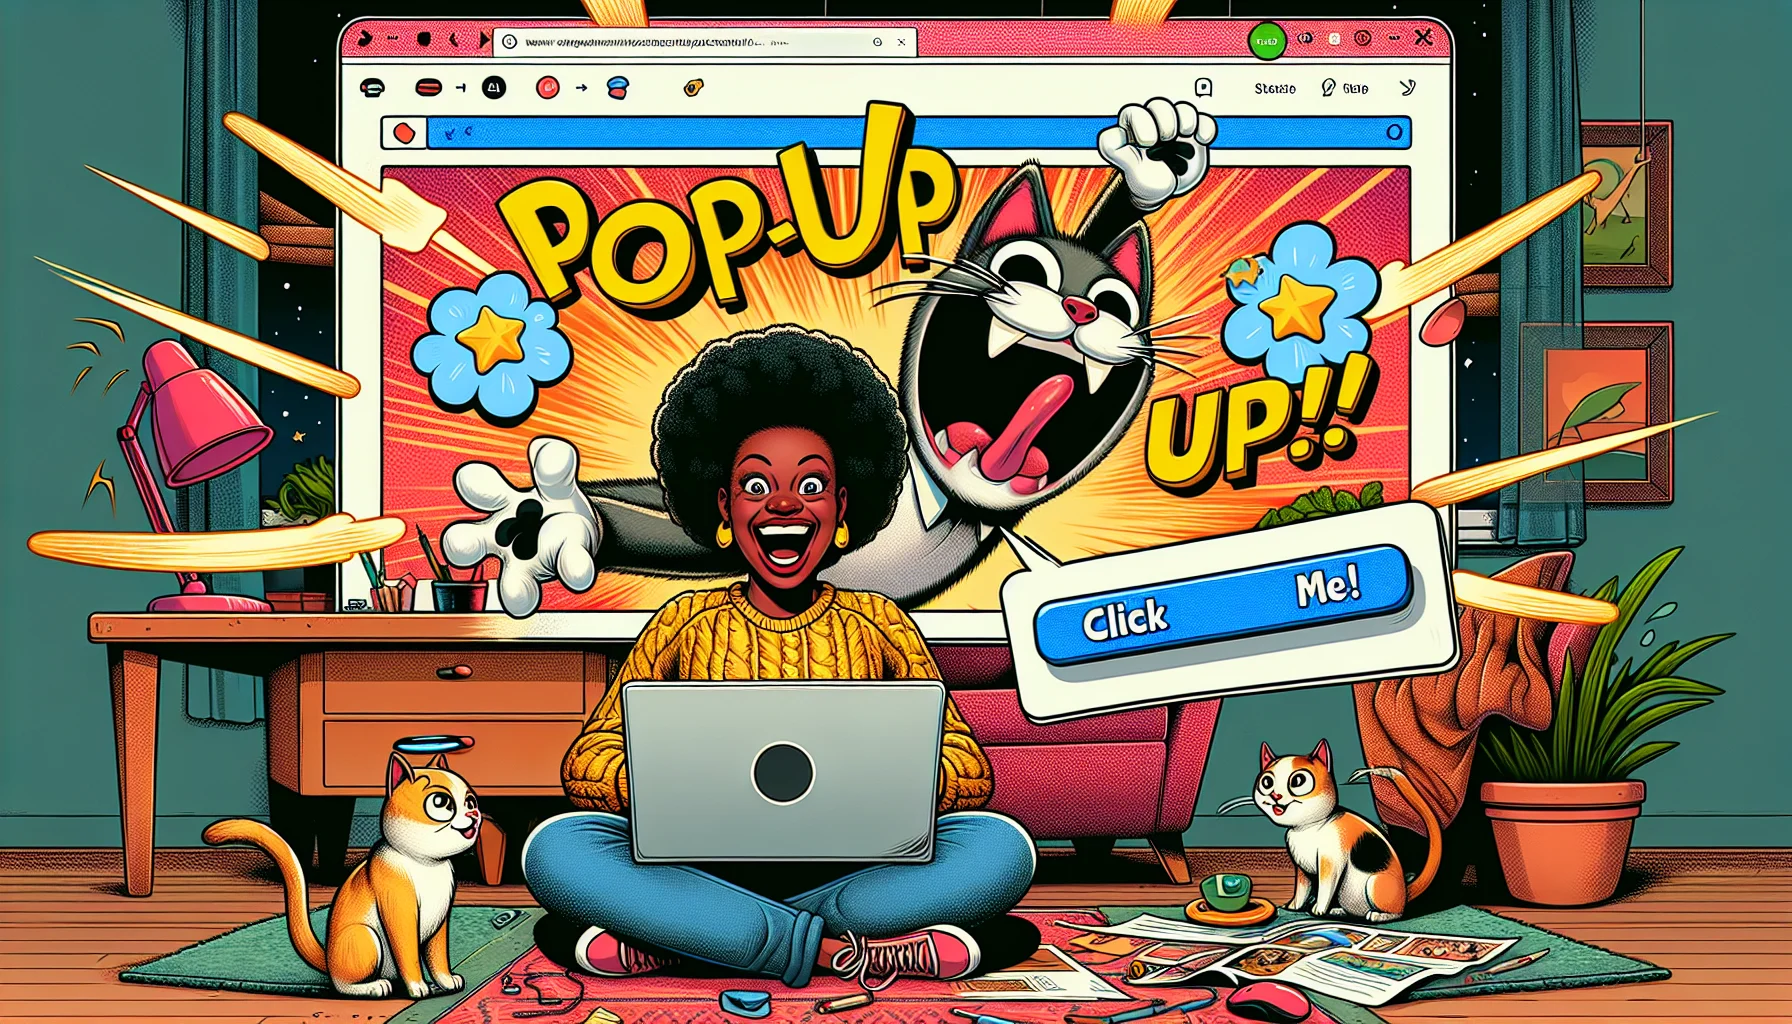 Generate an image showcasing a humorous scene of someone adding a pop-up on a website using a generic website creation platform. The image can be depicted in a cartoonish style, highlighting the characters' exaggerated expressions to make it feel funny. The scenario could include an African-American woman sitting at her cozy home office, laughing exuberantly while working on her laptop. A giant illustrated pop-up springs from the screen, with comic-style action lines and a huge, colorful 'click me!' button. Nearby, a couple of cats look on with wide eyes, pint-sized mouse-sized pop-ups around them, reflecting the main theme.